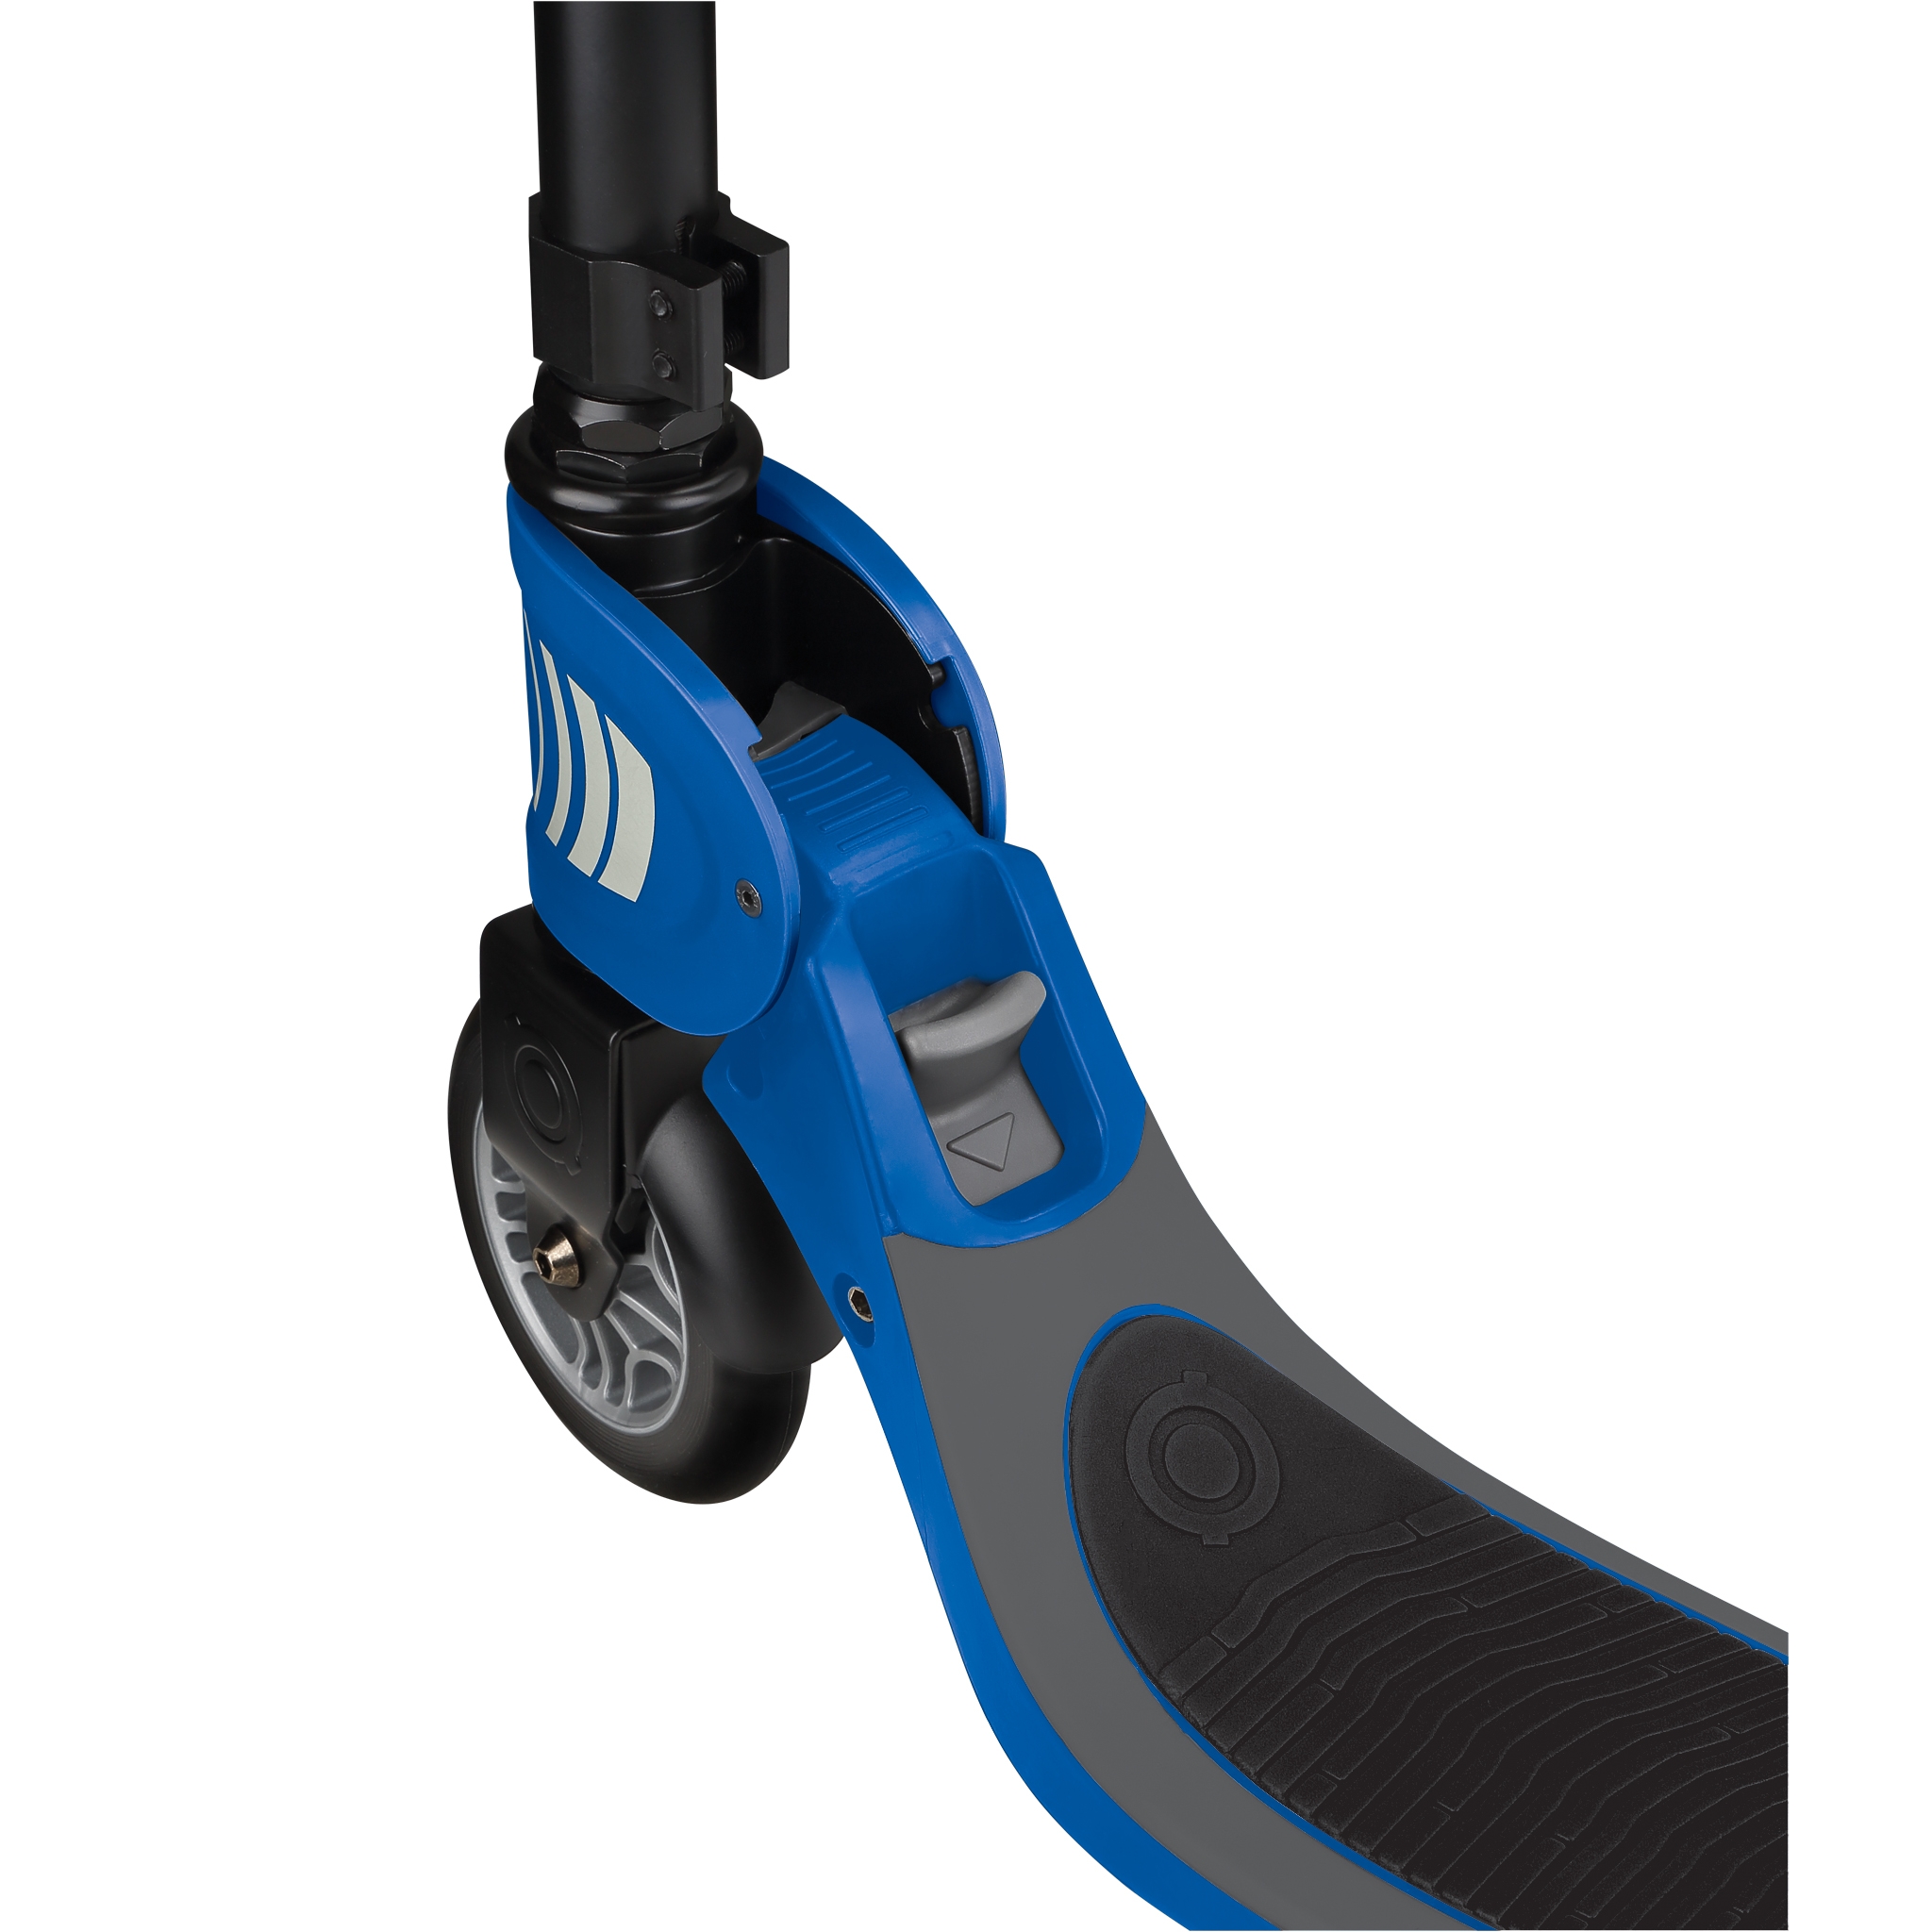 FLOW-FOLDABLE-125-2-wheel-folding-scooter-with-push-button-navy-blue 4